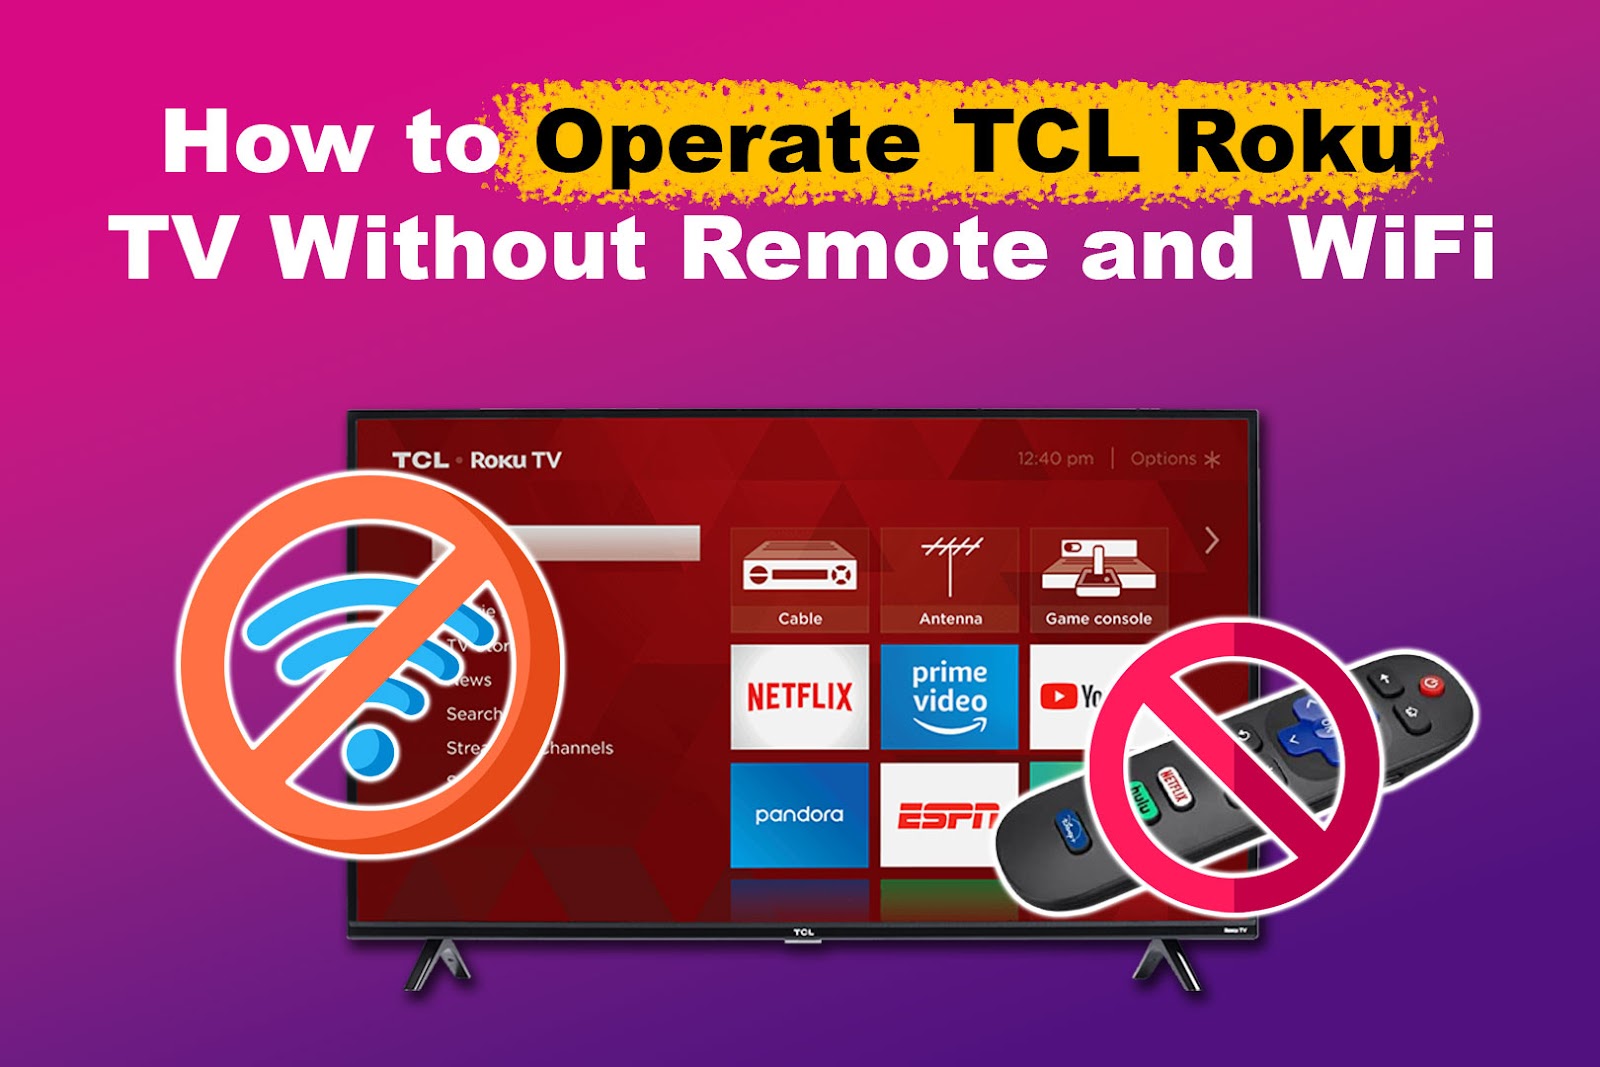 How to Operate TCL Roku TV Without Remote and WiFi